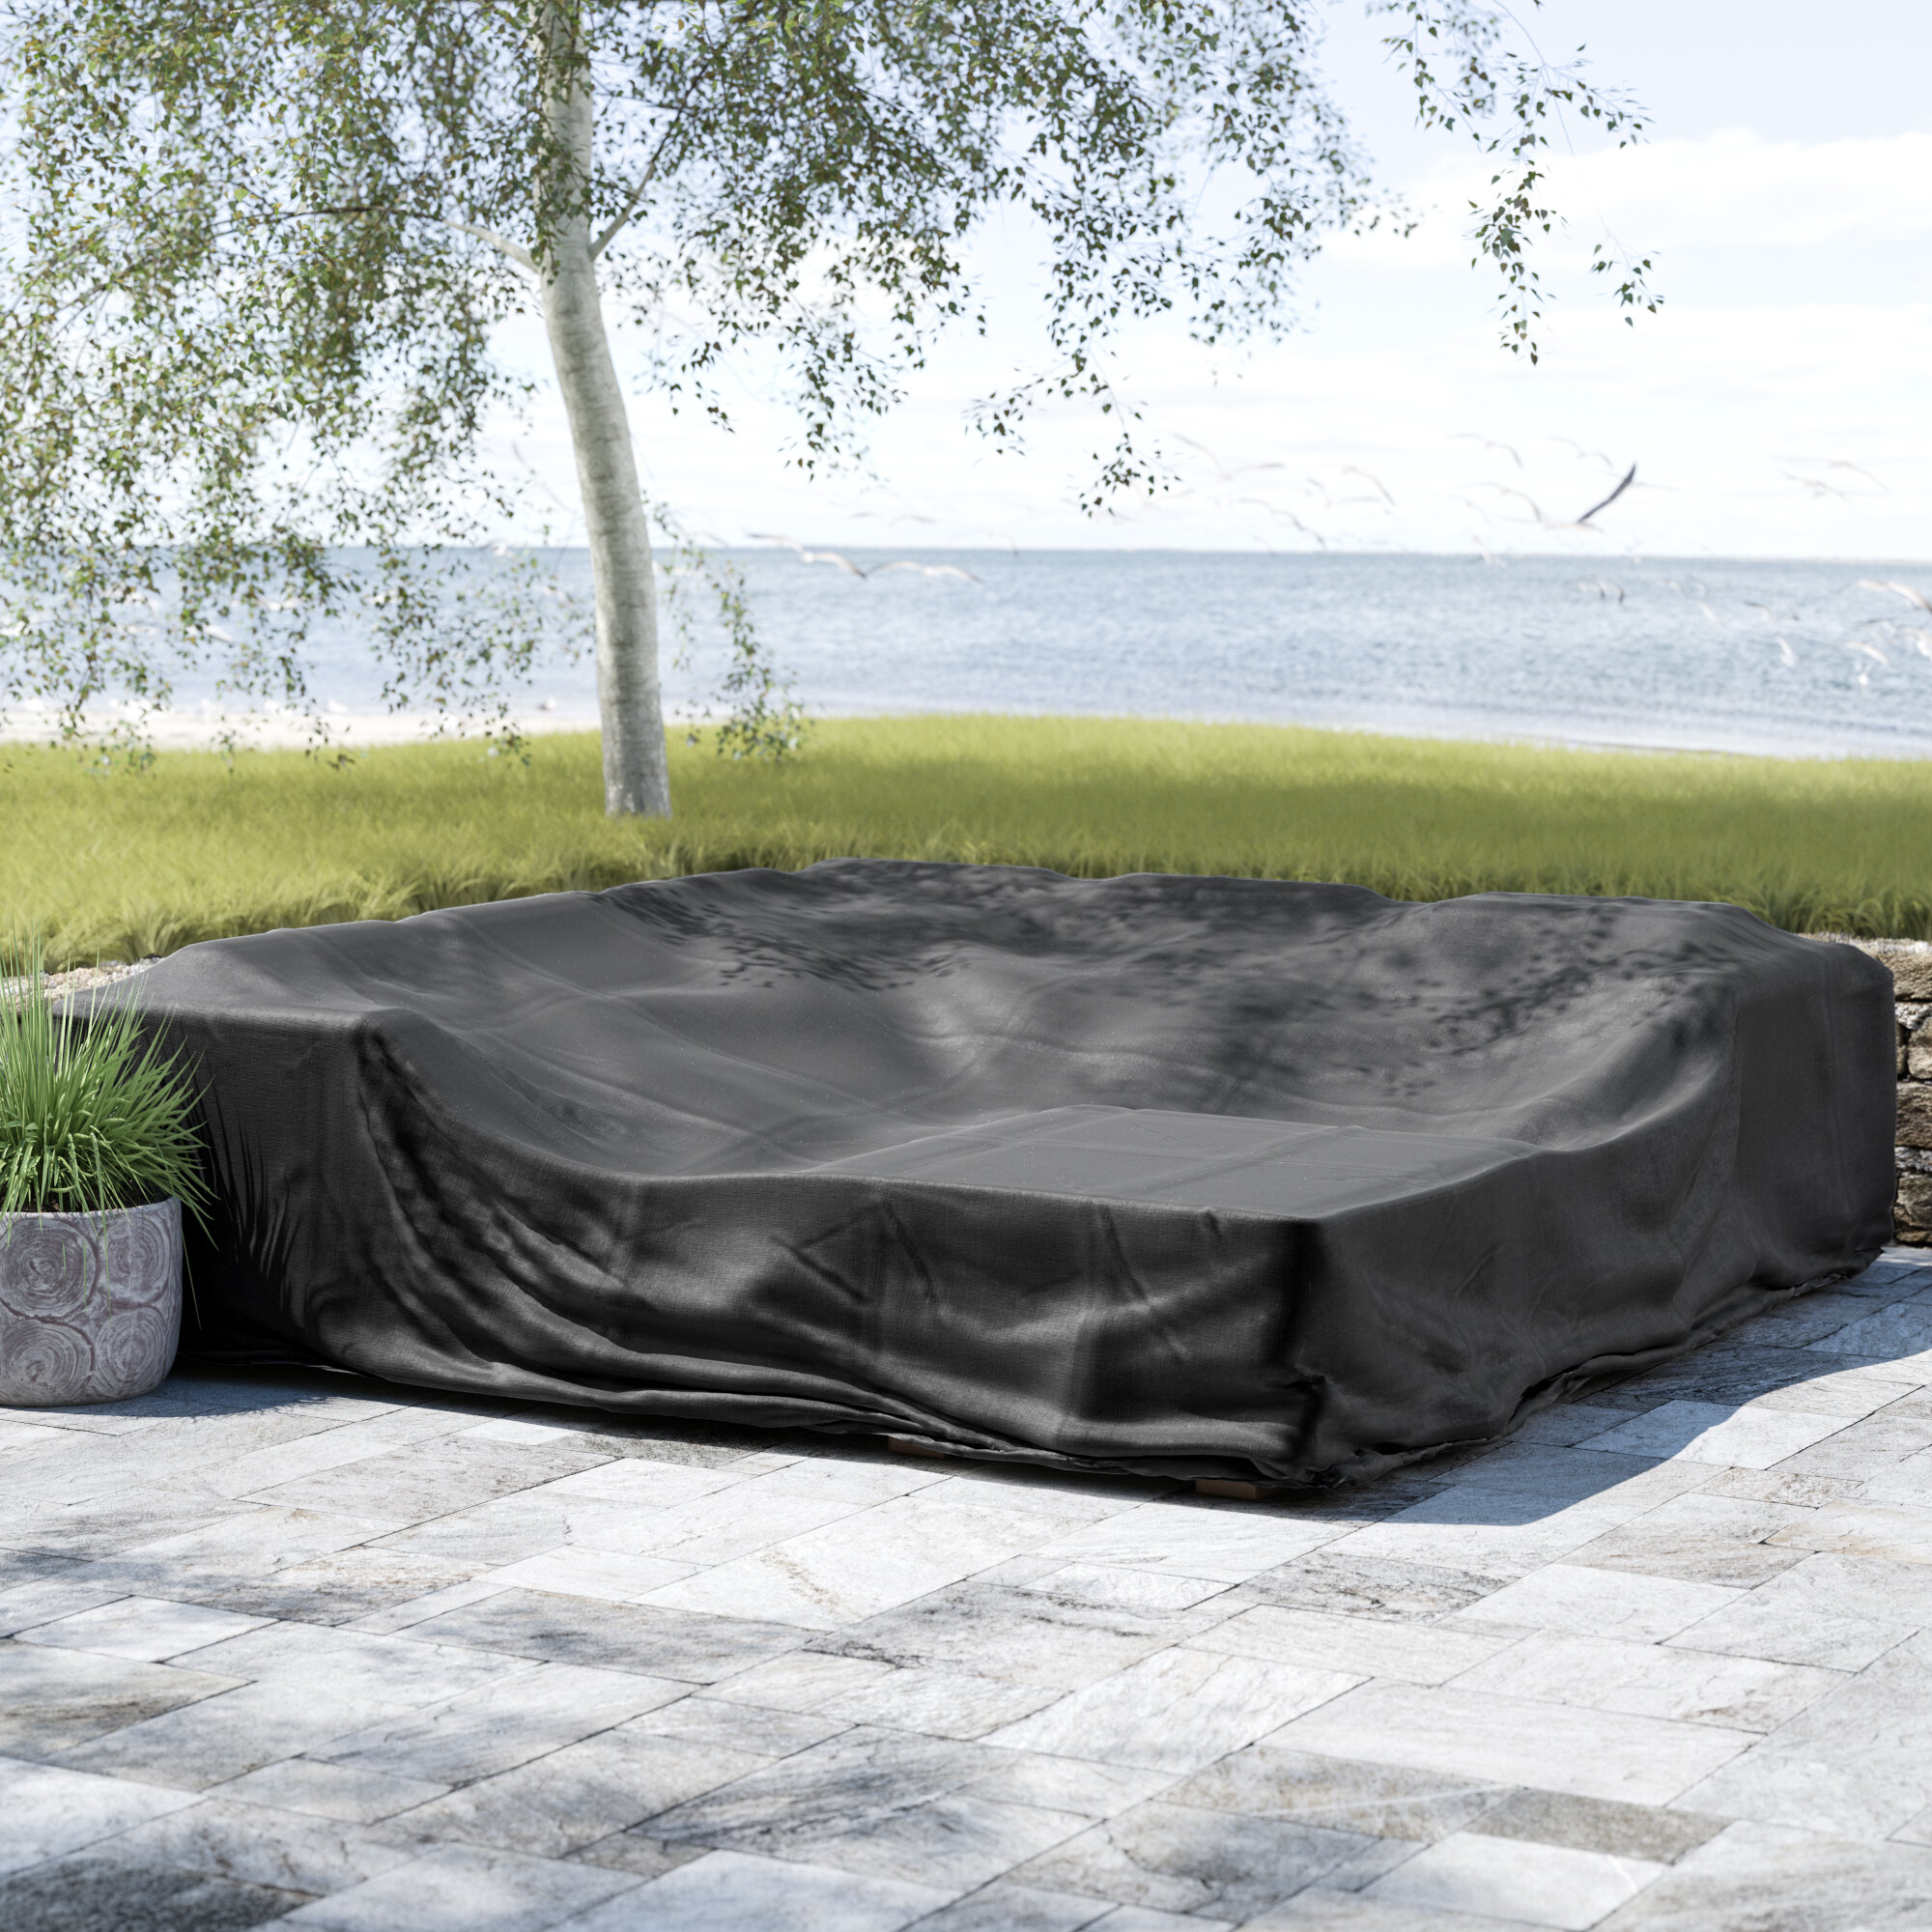 Patio Furniture Covers You'll Love